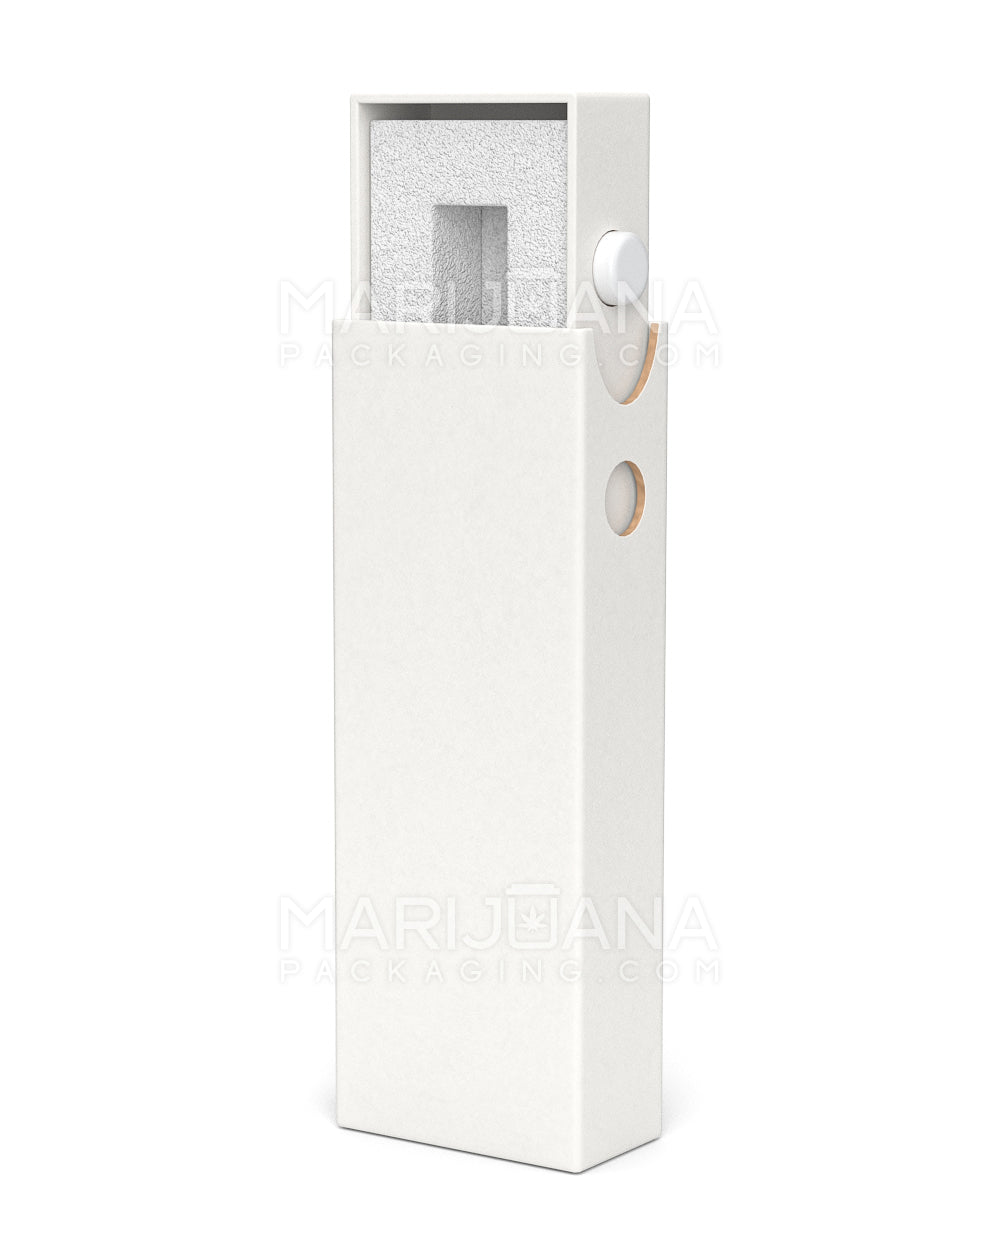 Child Resistant & Sustainable | 100% Recyclable Slim Cardboard Vape Cartridge Box w/ Press Button & Foam Insert | 100mm - White - 100 Count - 1